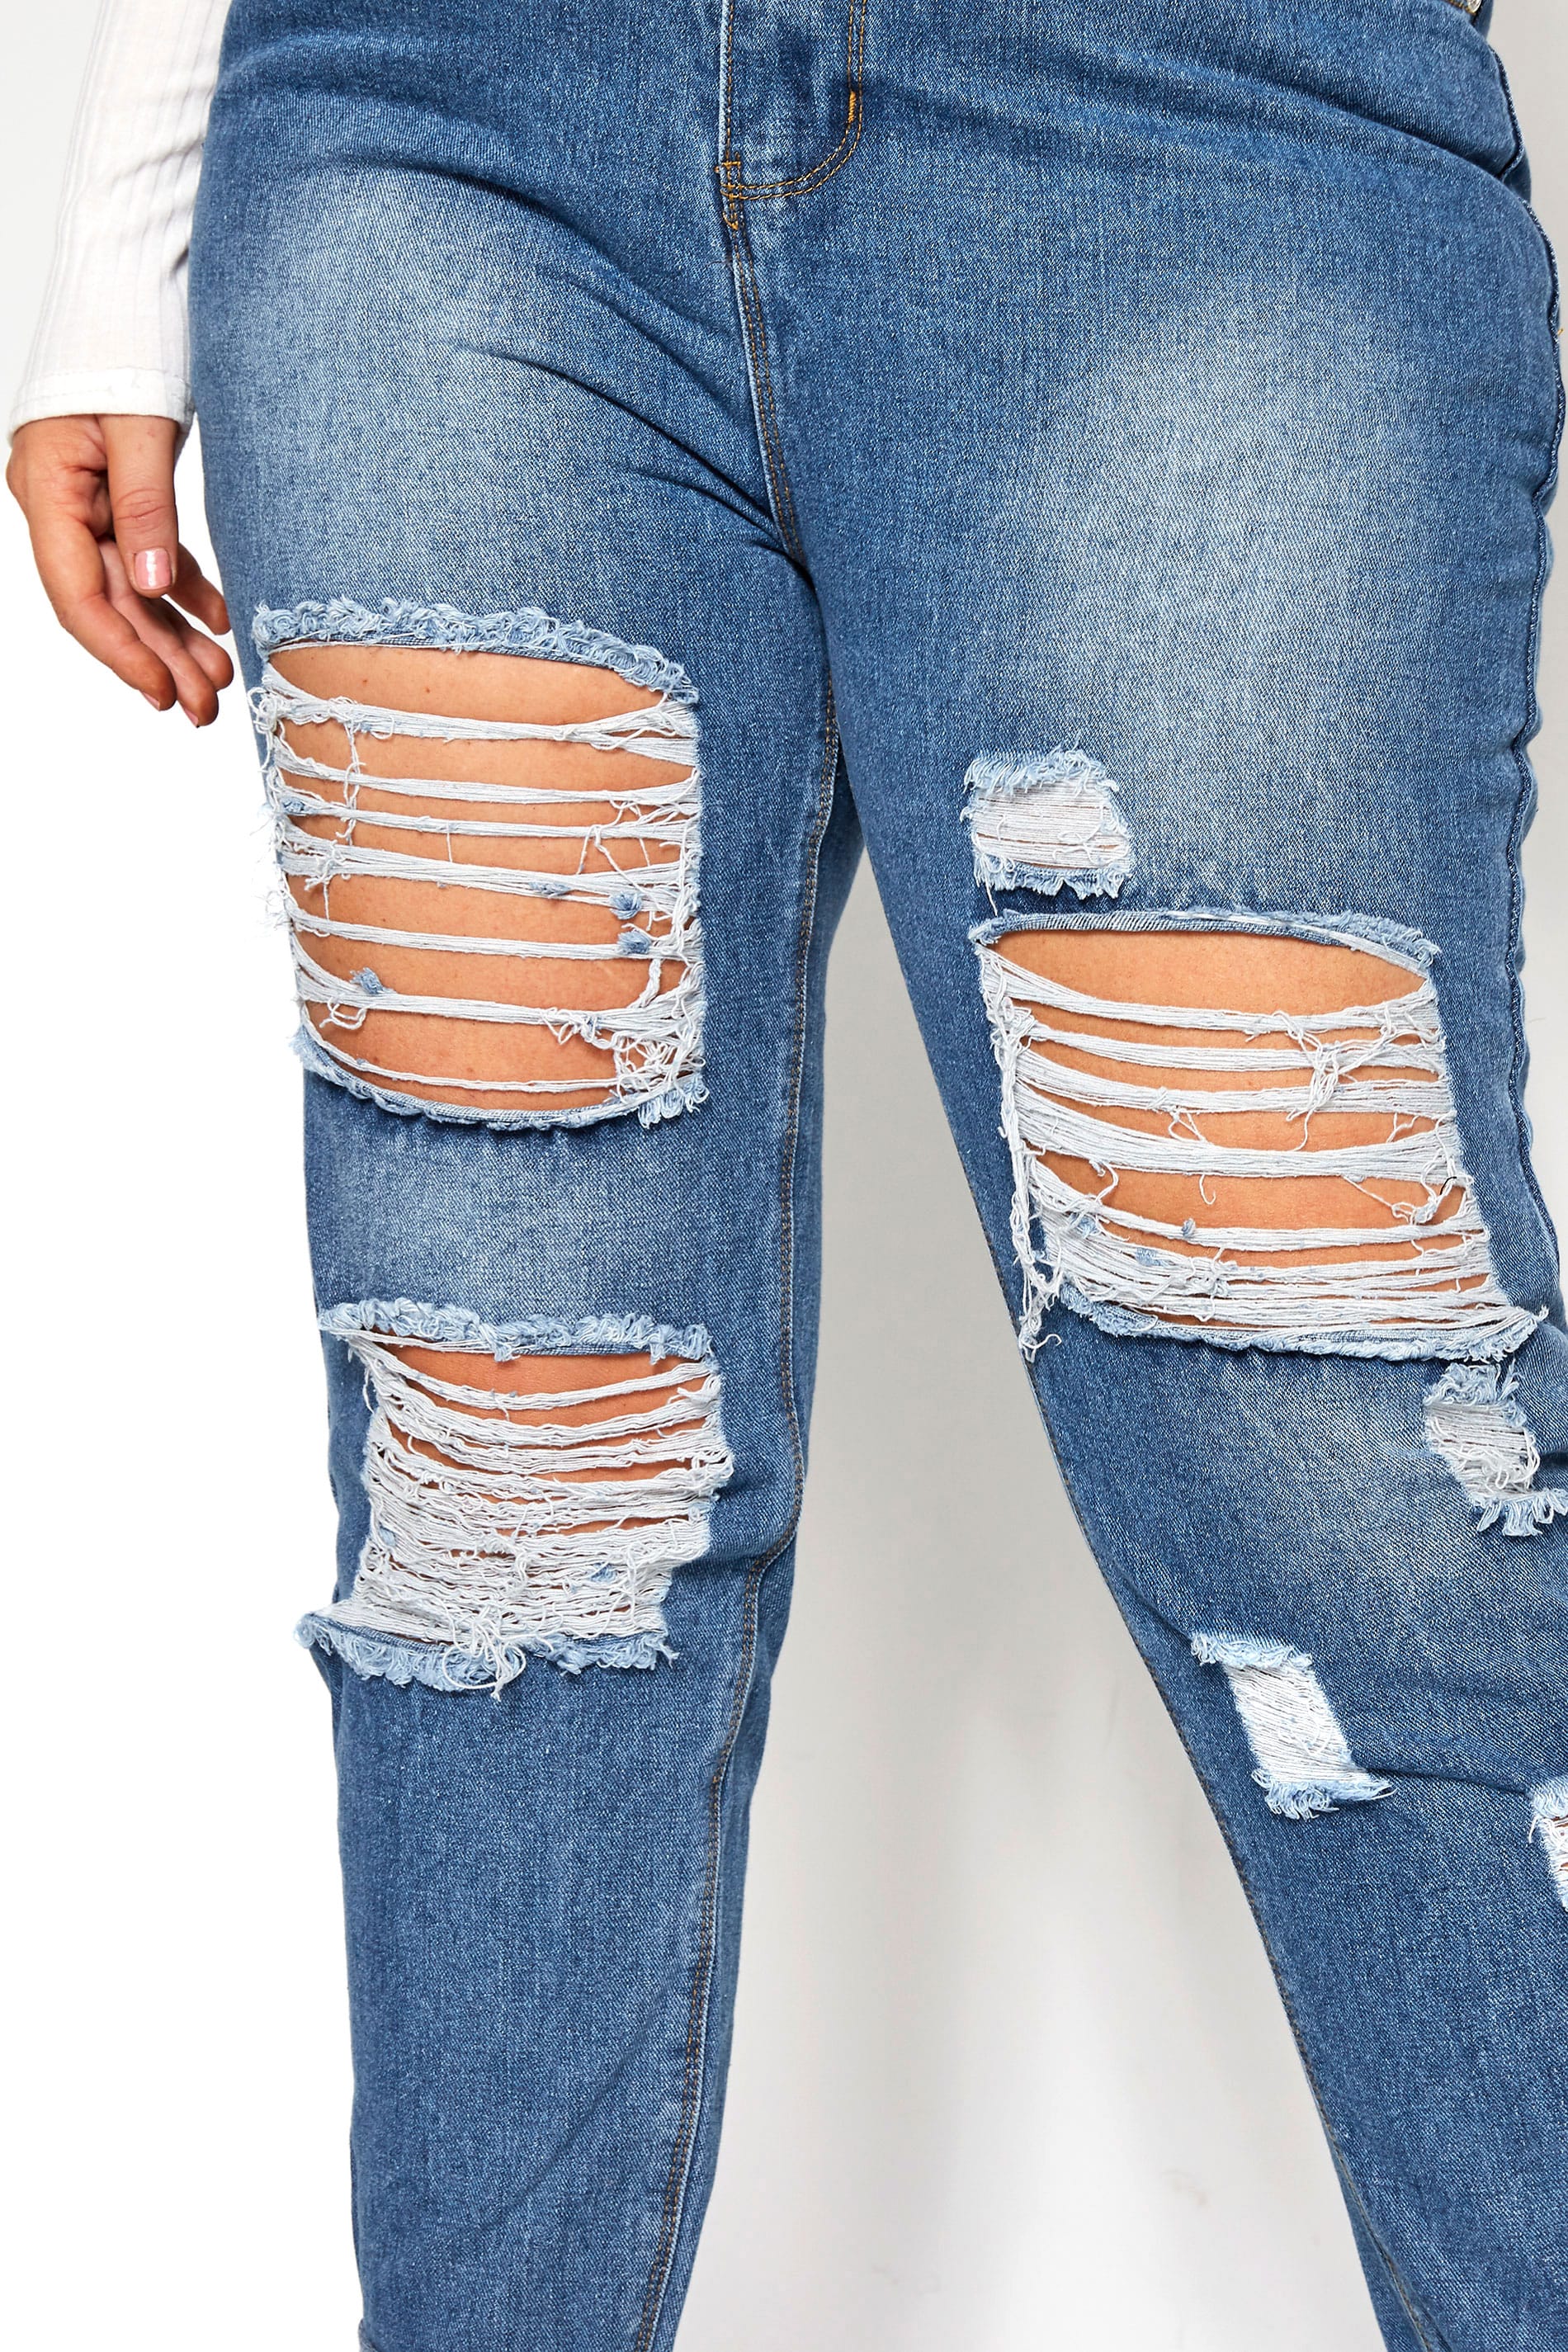 extreme ripped blue jeans